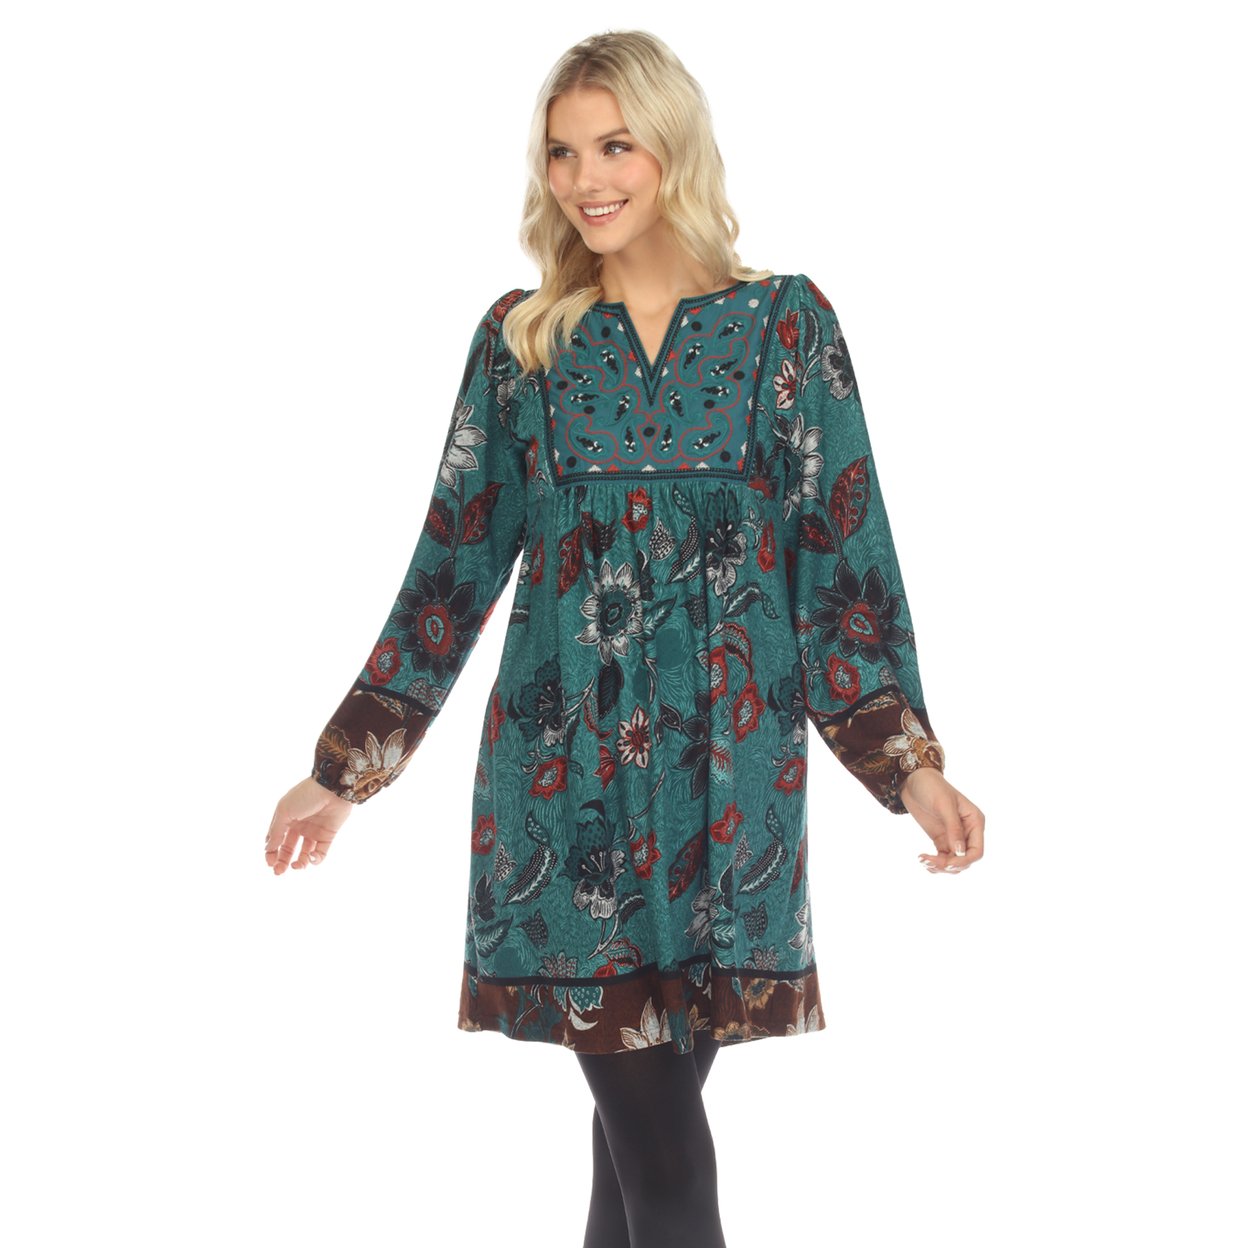 White Mark Women's Floral Paisley Sweater Dress - Teal, 1x